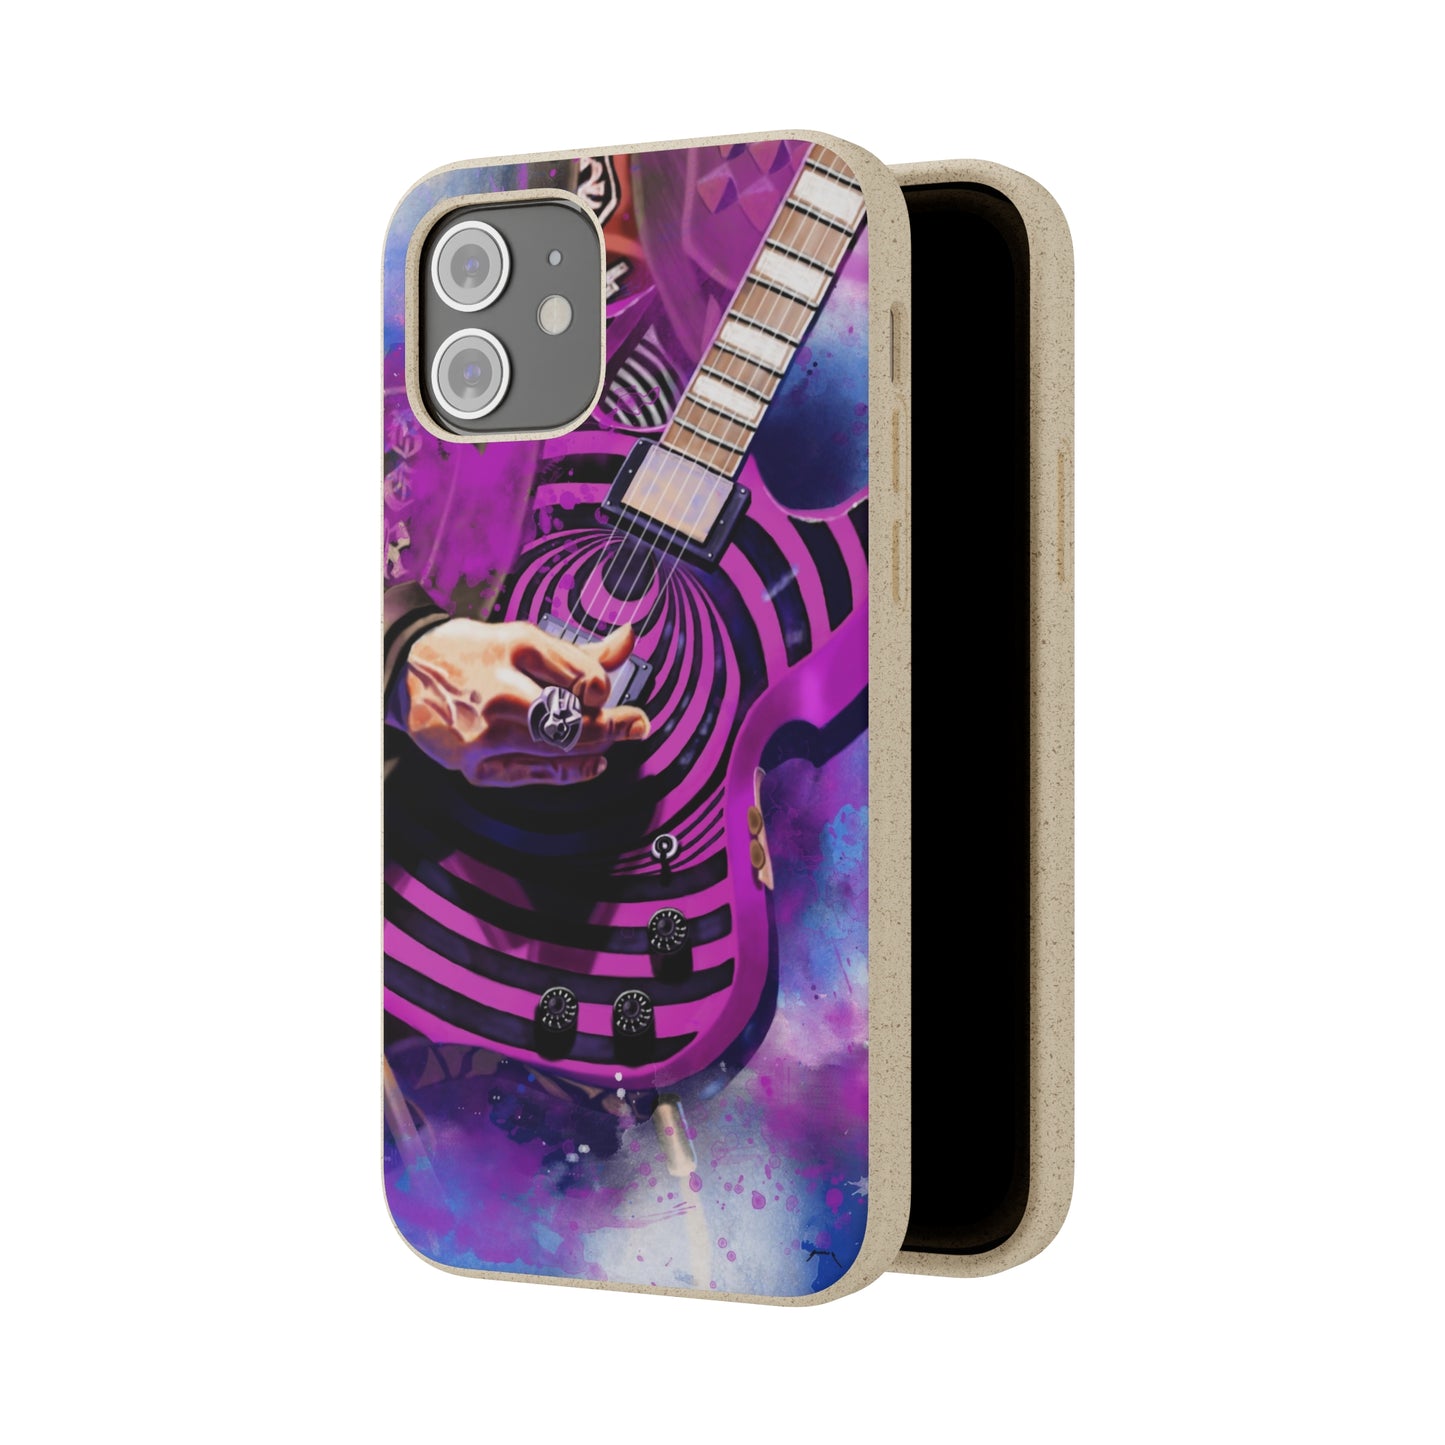 Digital painting of a purple black electric guitar with hand printed on a biodegradable iphone phone case